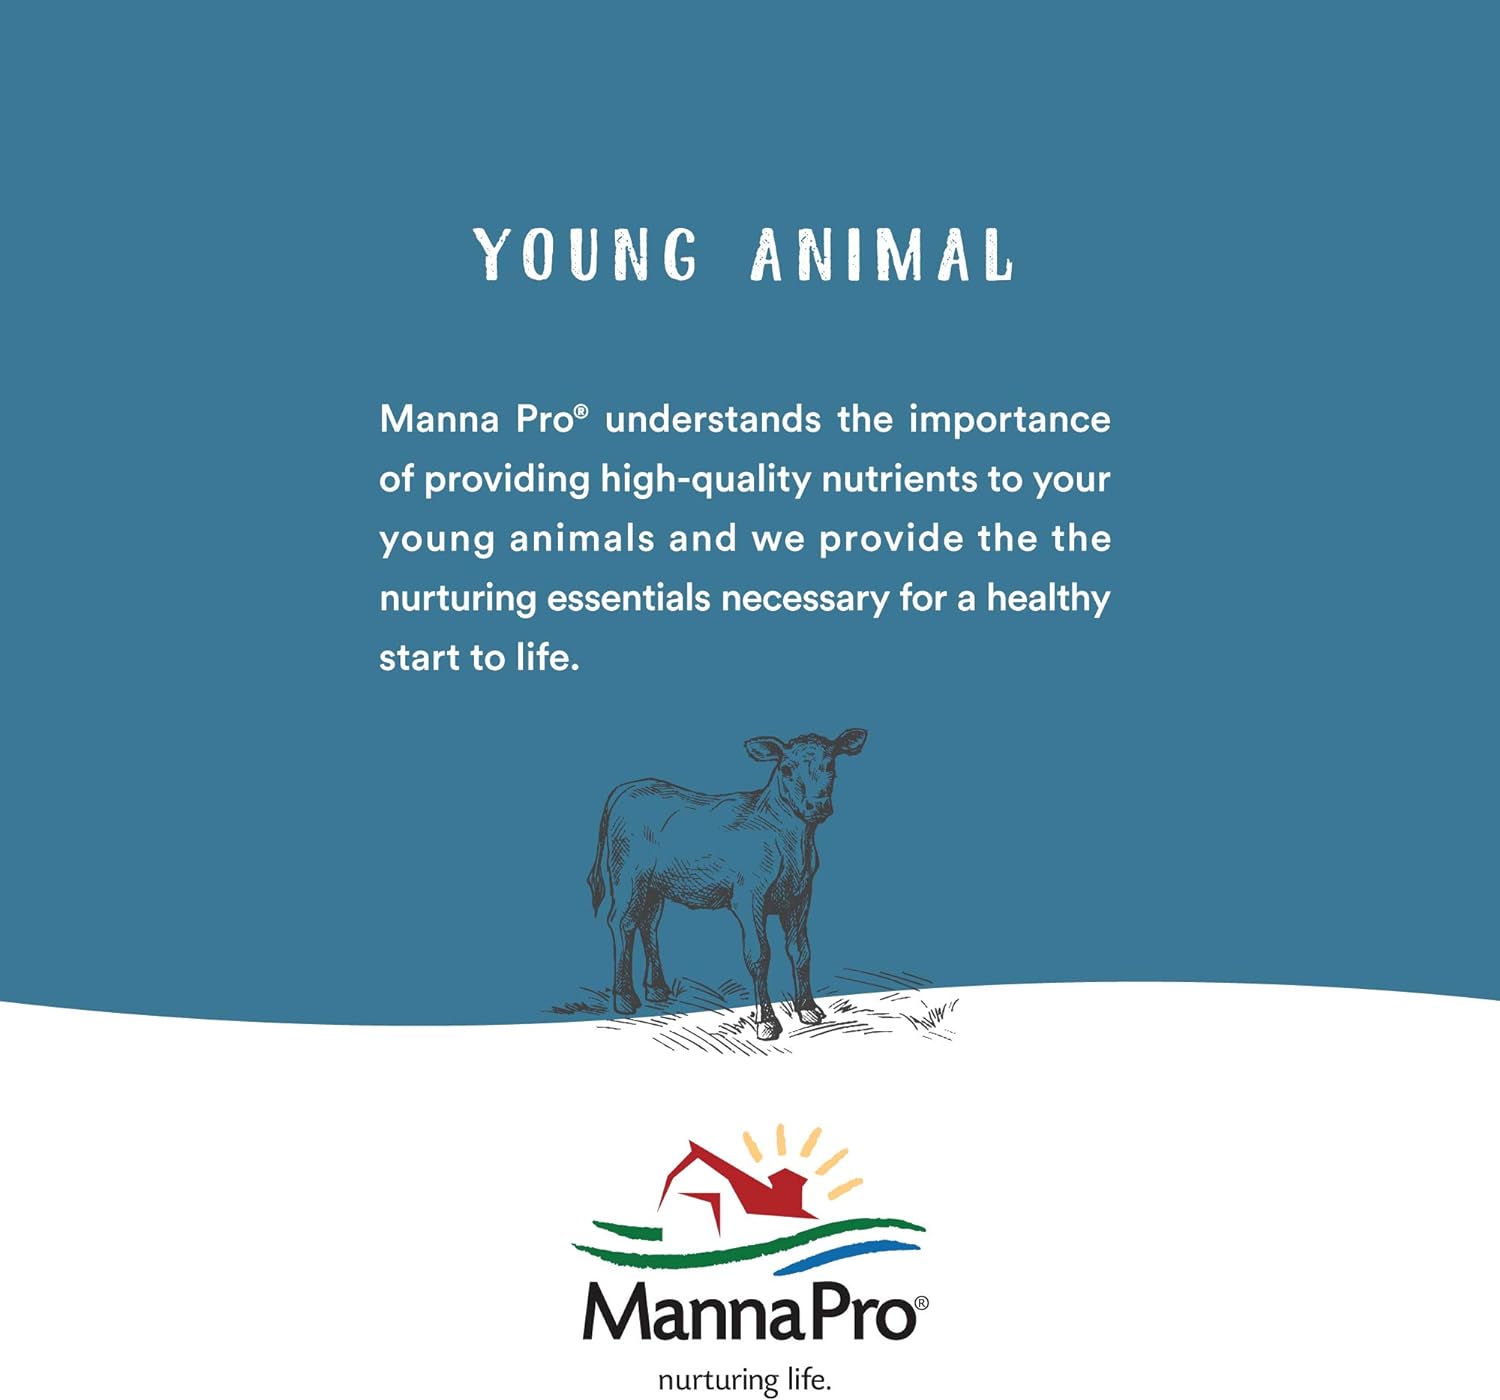 Manna Pro Nurse All Multi Species Milk Replacer with Probiotics for Horses | Formulated with All-Milk Protein to Promote Growth and Development | Helps Support Healthy Gut and Digestions| 8lbs : Nutrition Gels : Pet Supplies